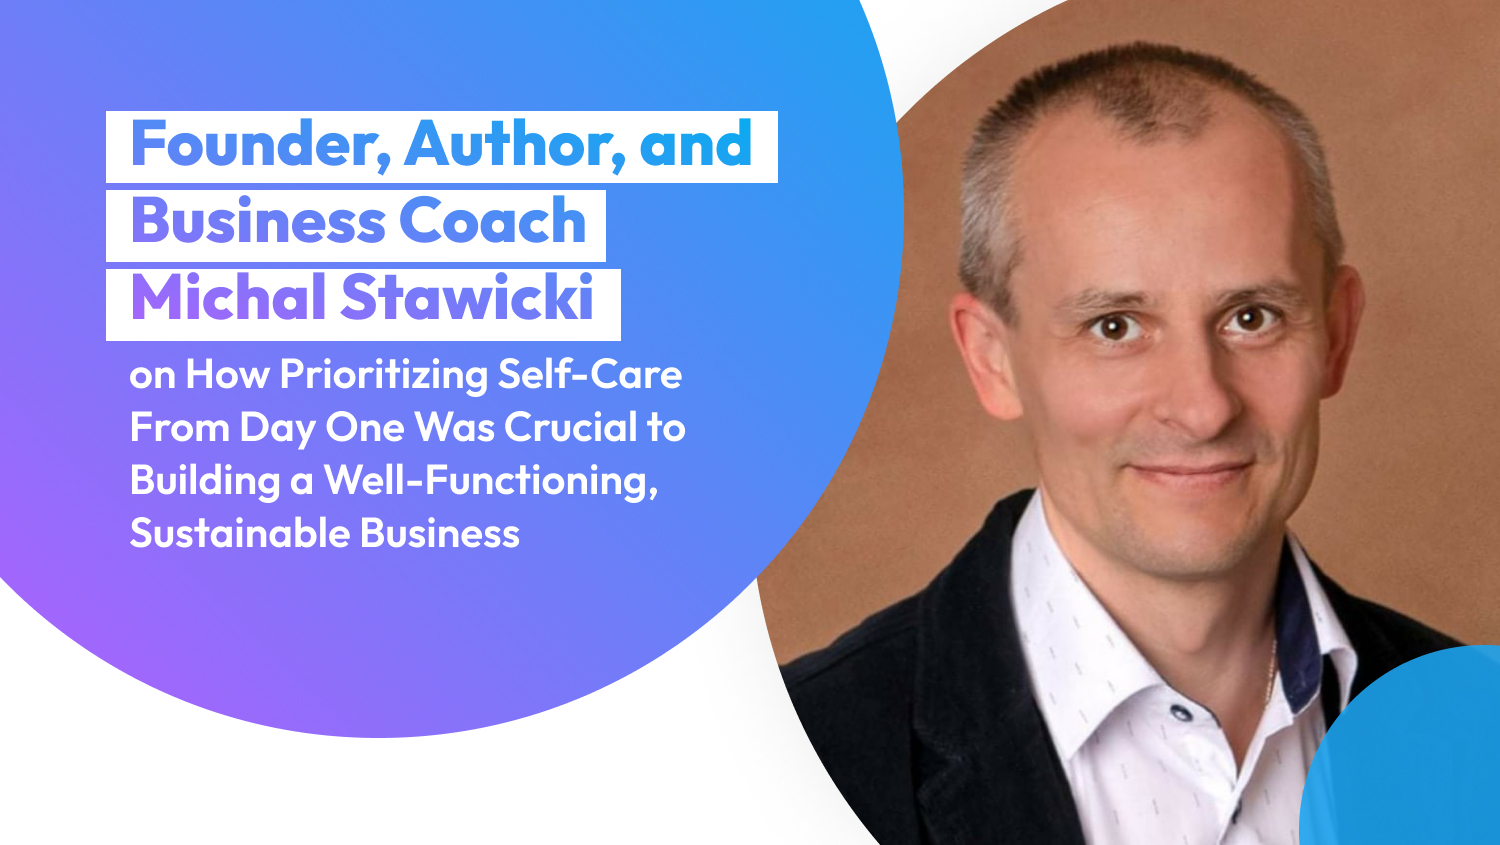 Founder, Author, and Business Coach Michal Stawicki